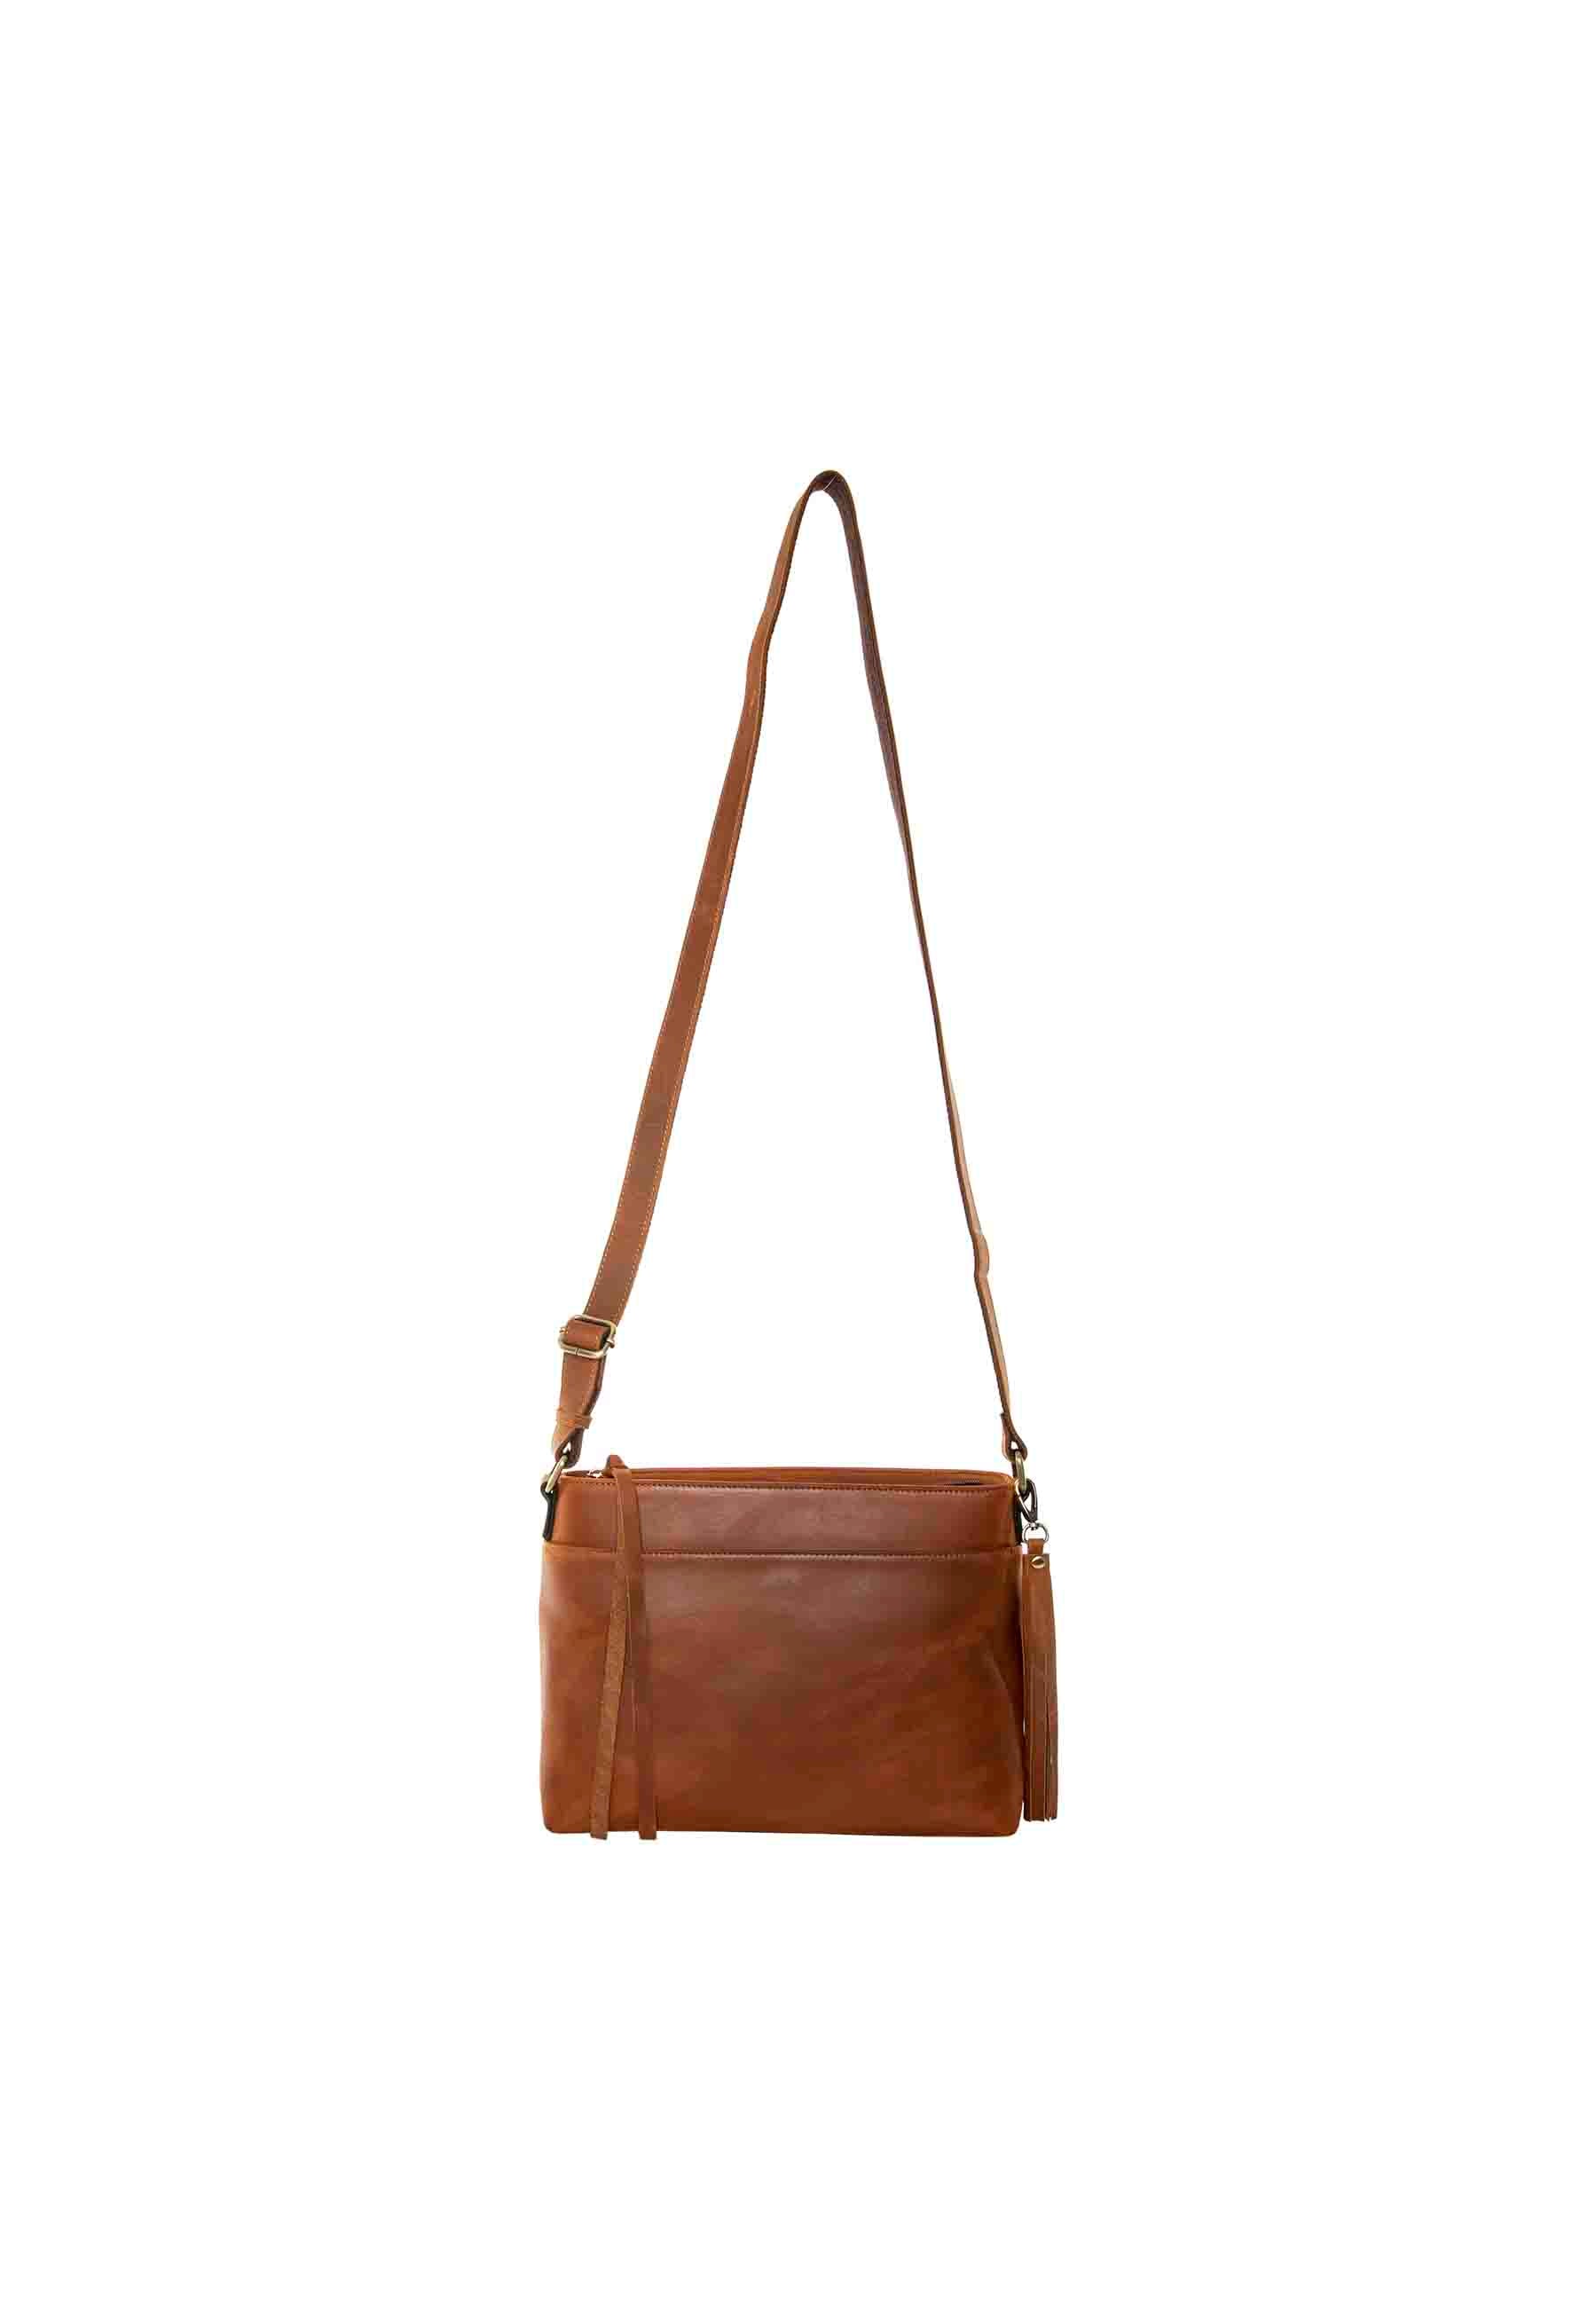 full crossbody view of pistol purse in leather